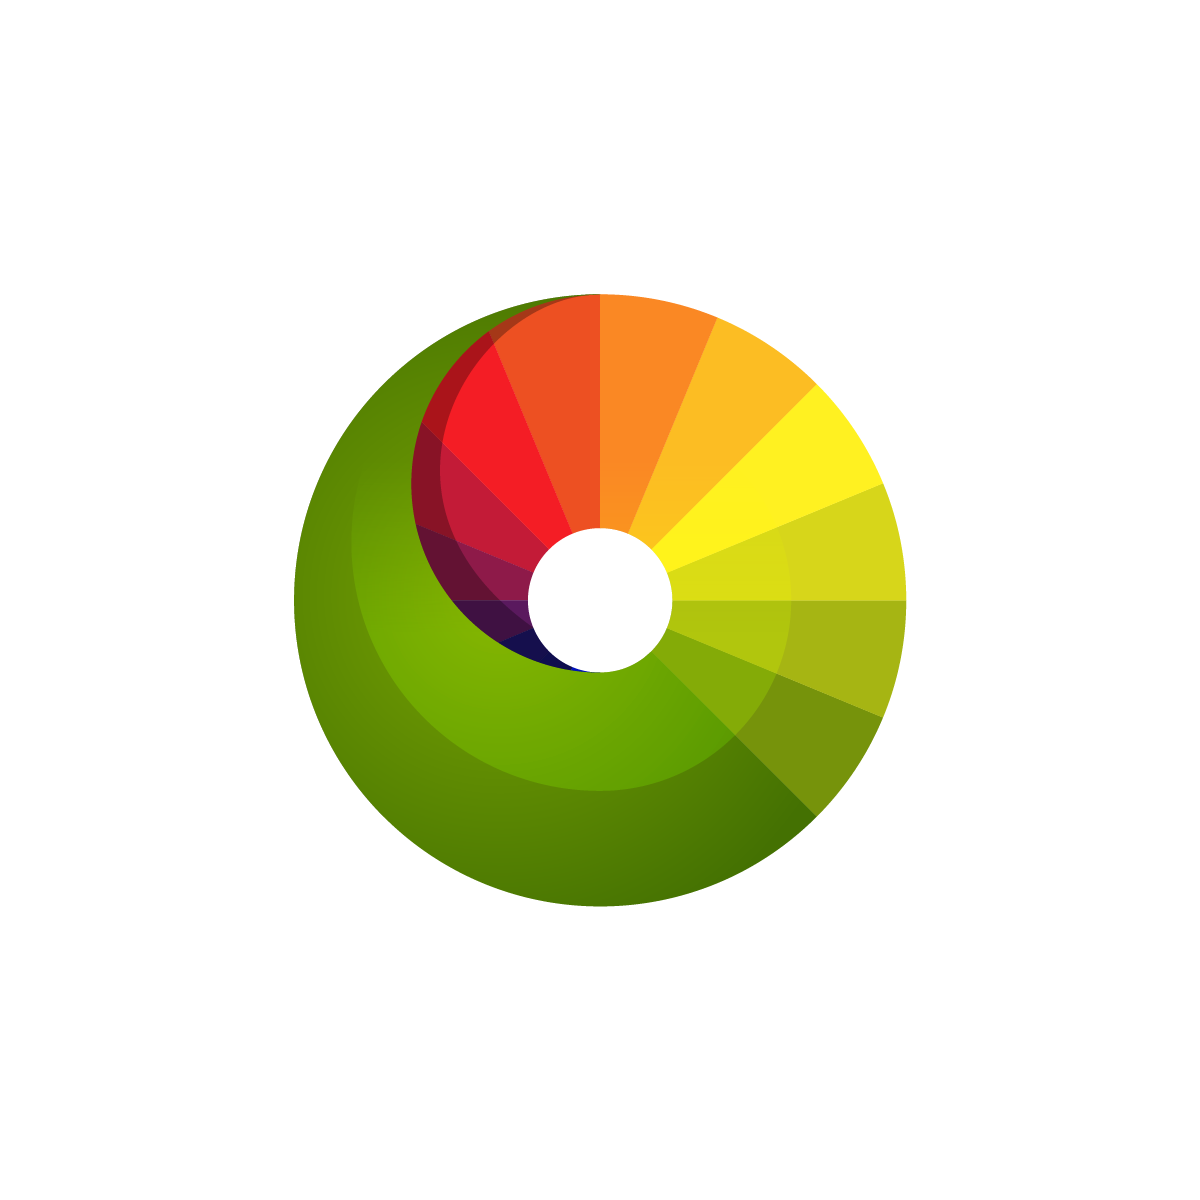 Creative logo merging pie chart (traffic) and alligator tail (gator), ideal for analytics apps and traffic checker websites.